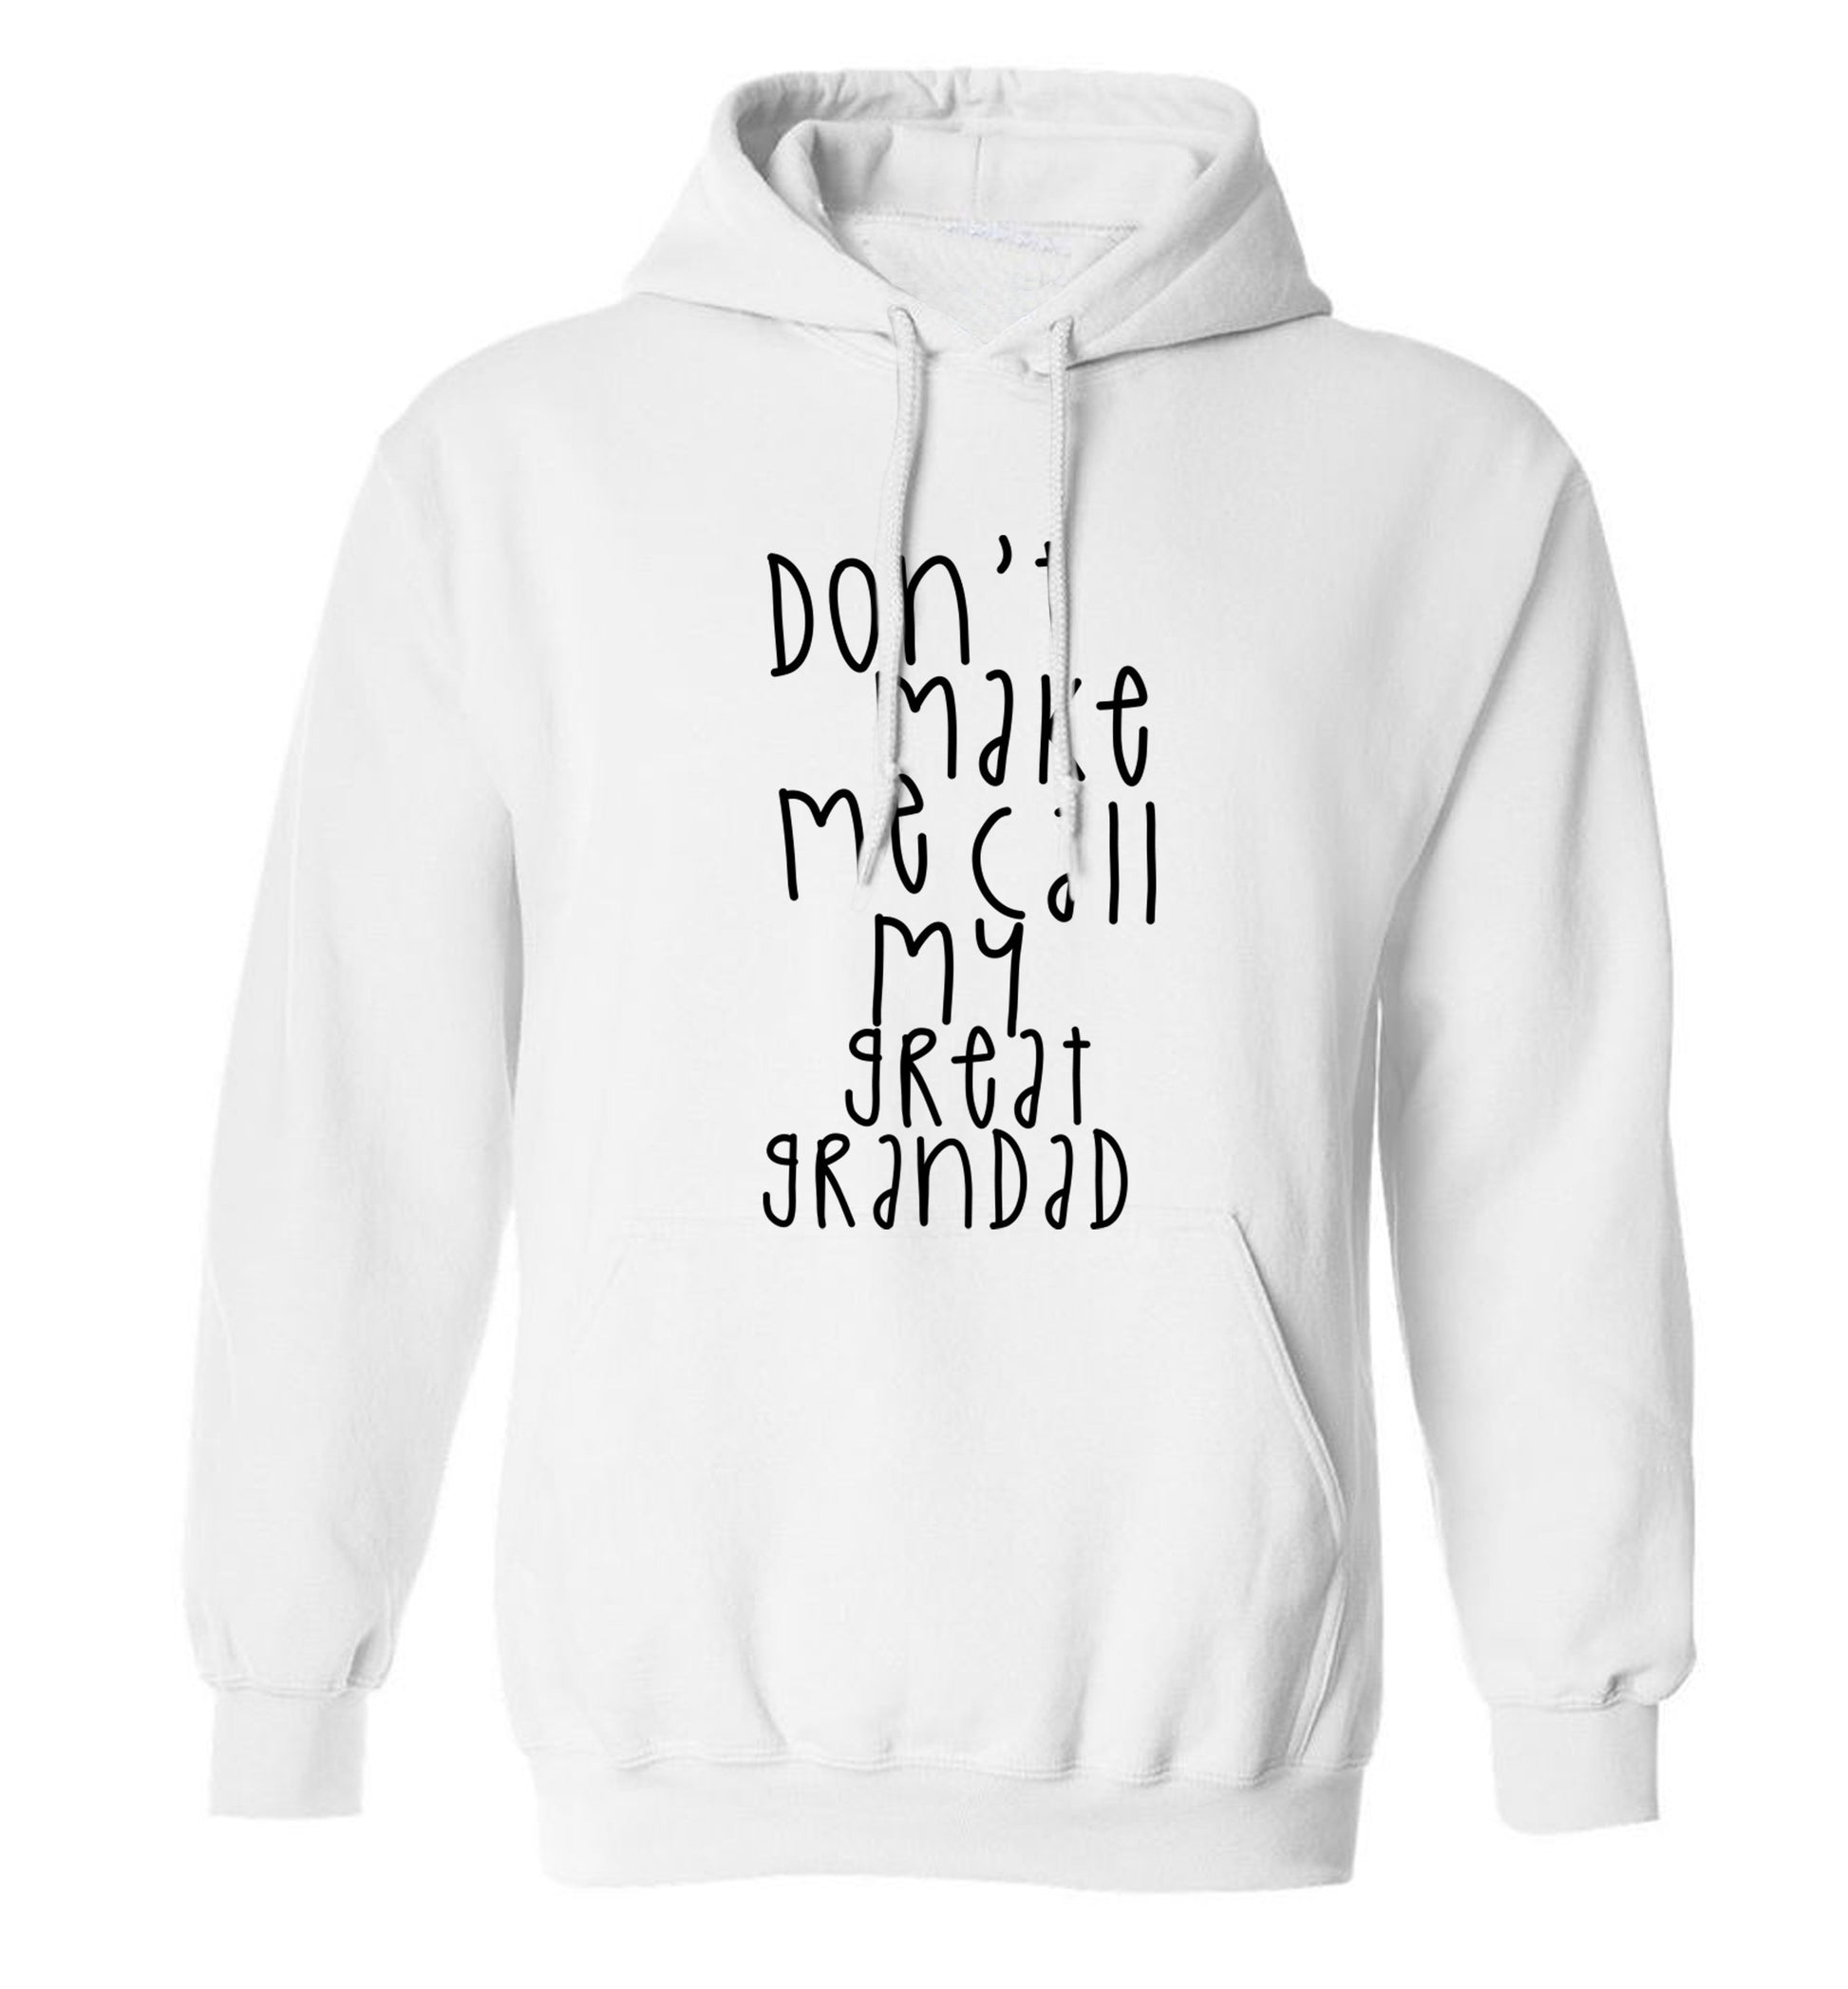 Don't make me call my great grandad adults unisex white hoodie 2XL